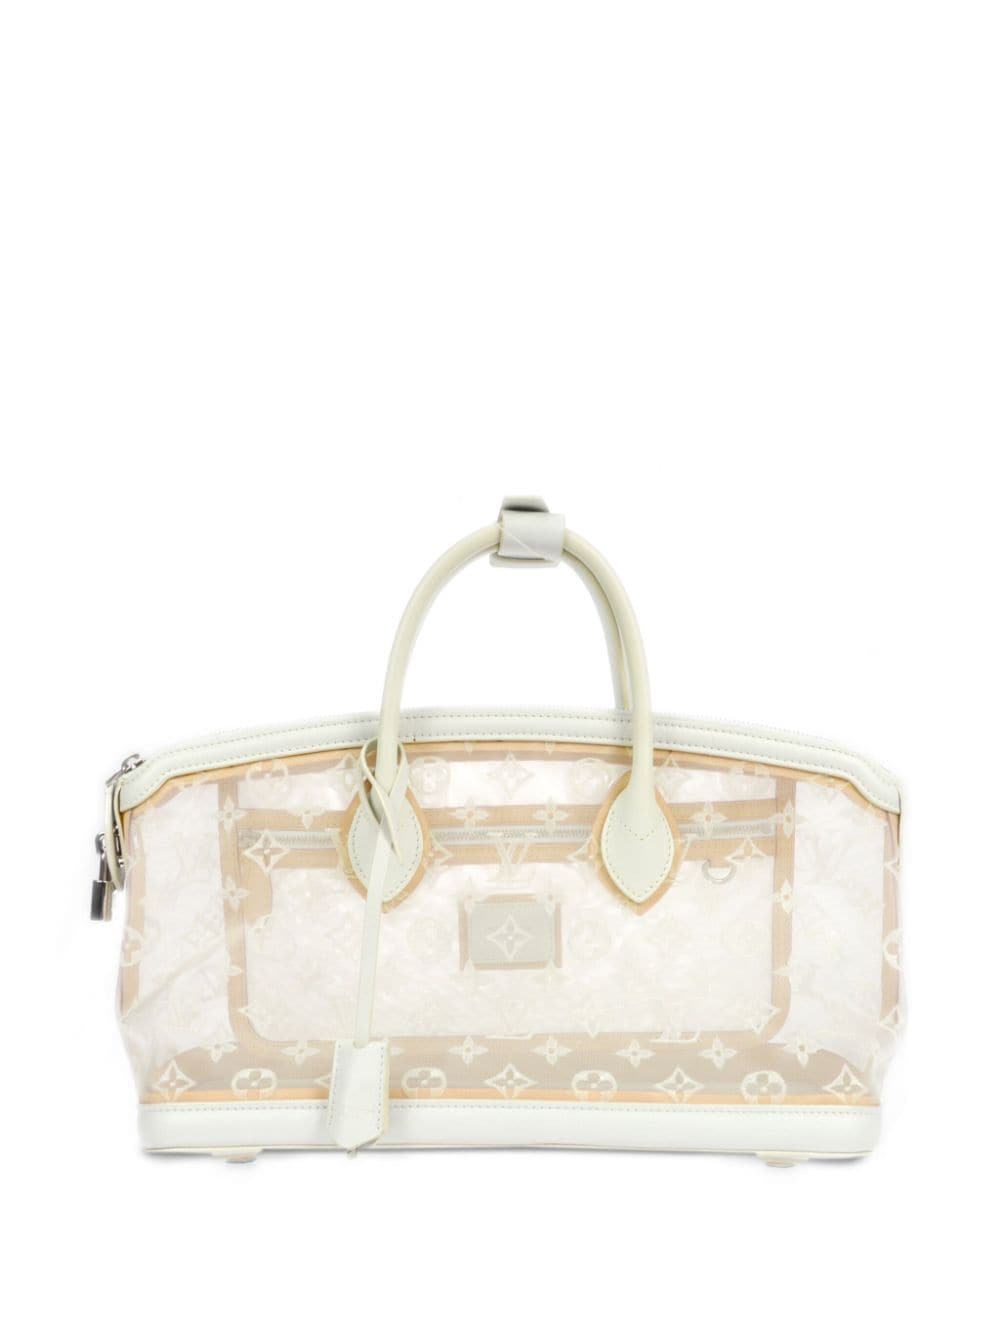 Pre-owned Louis Vuitton 2012  Lockit East West Handbag In White